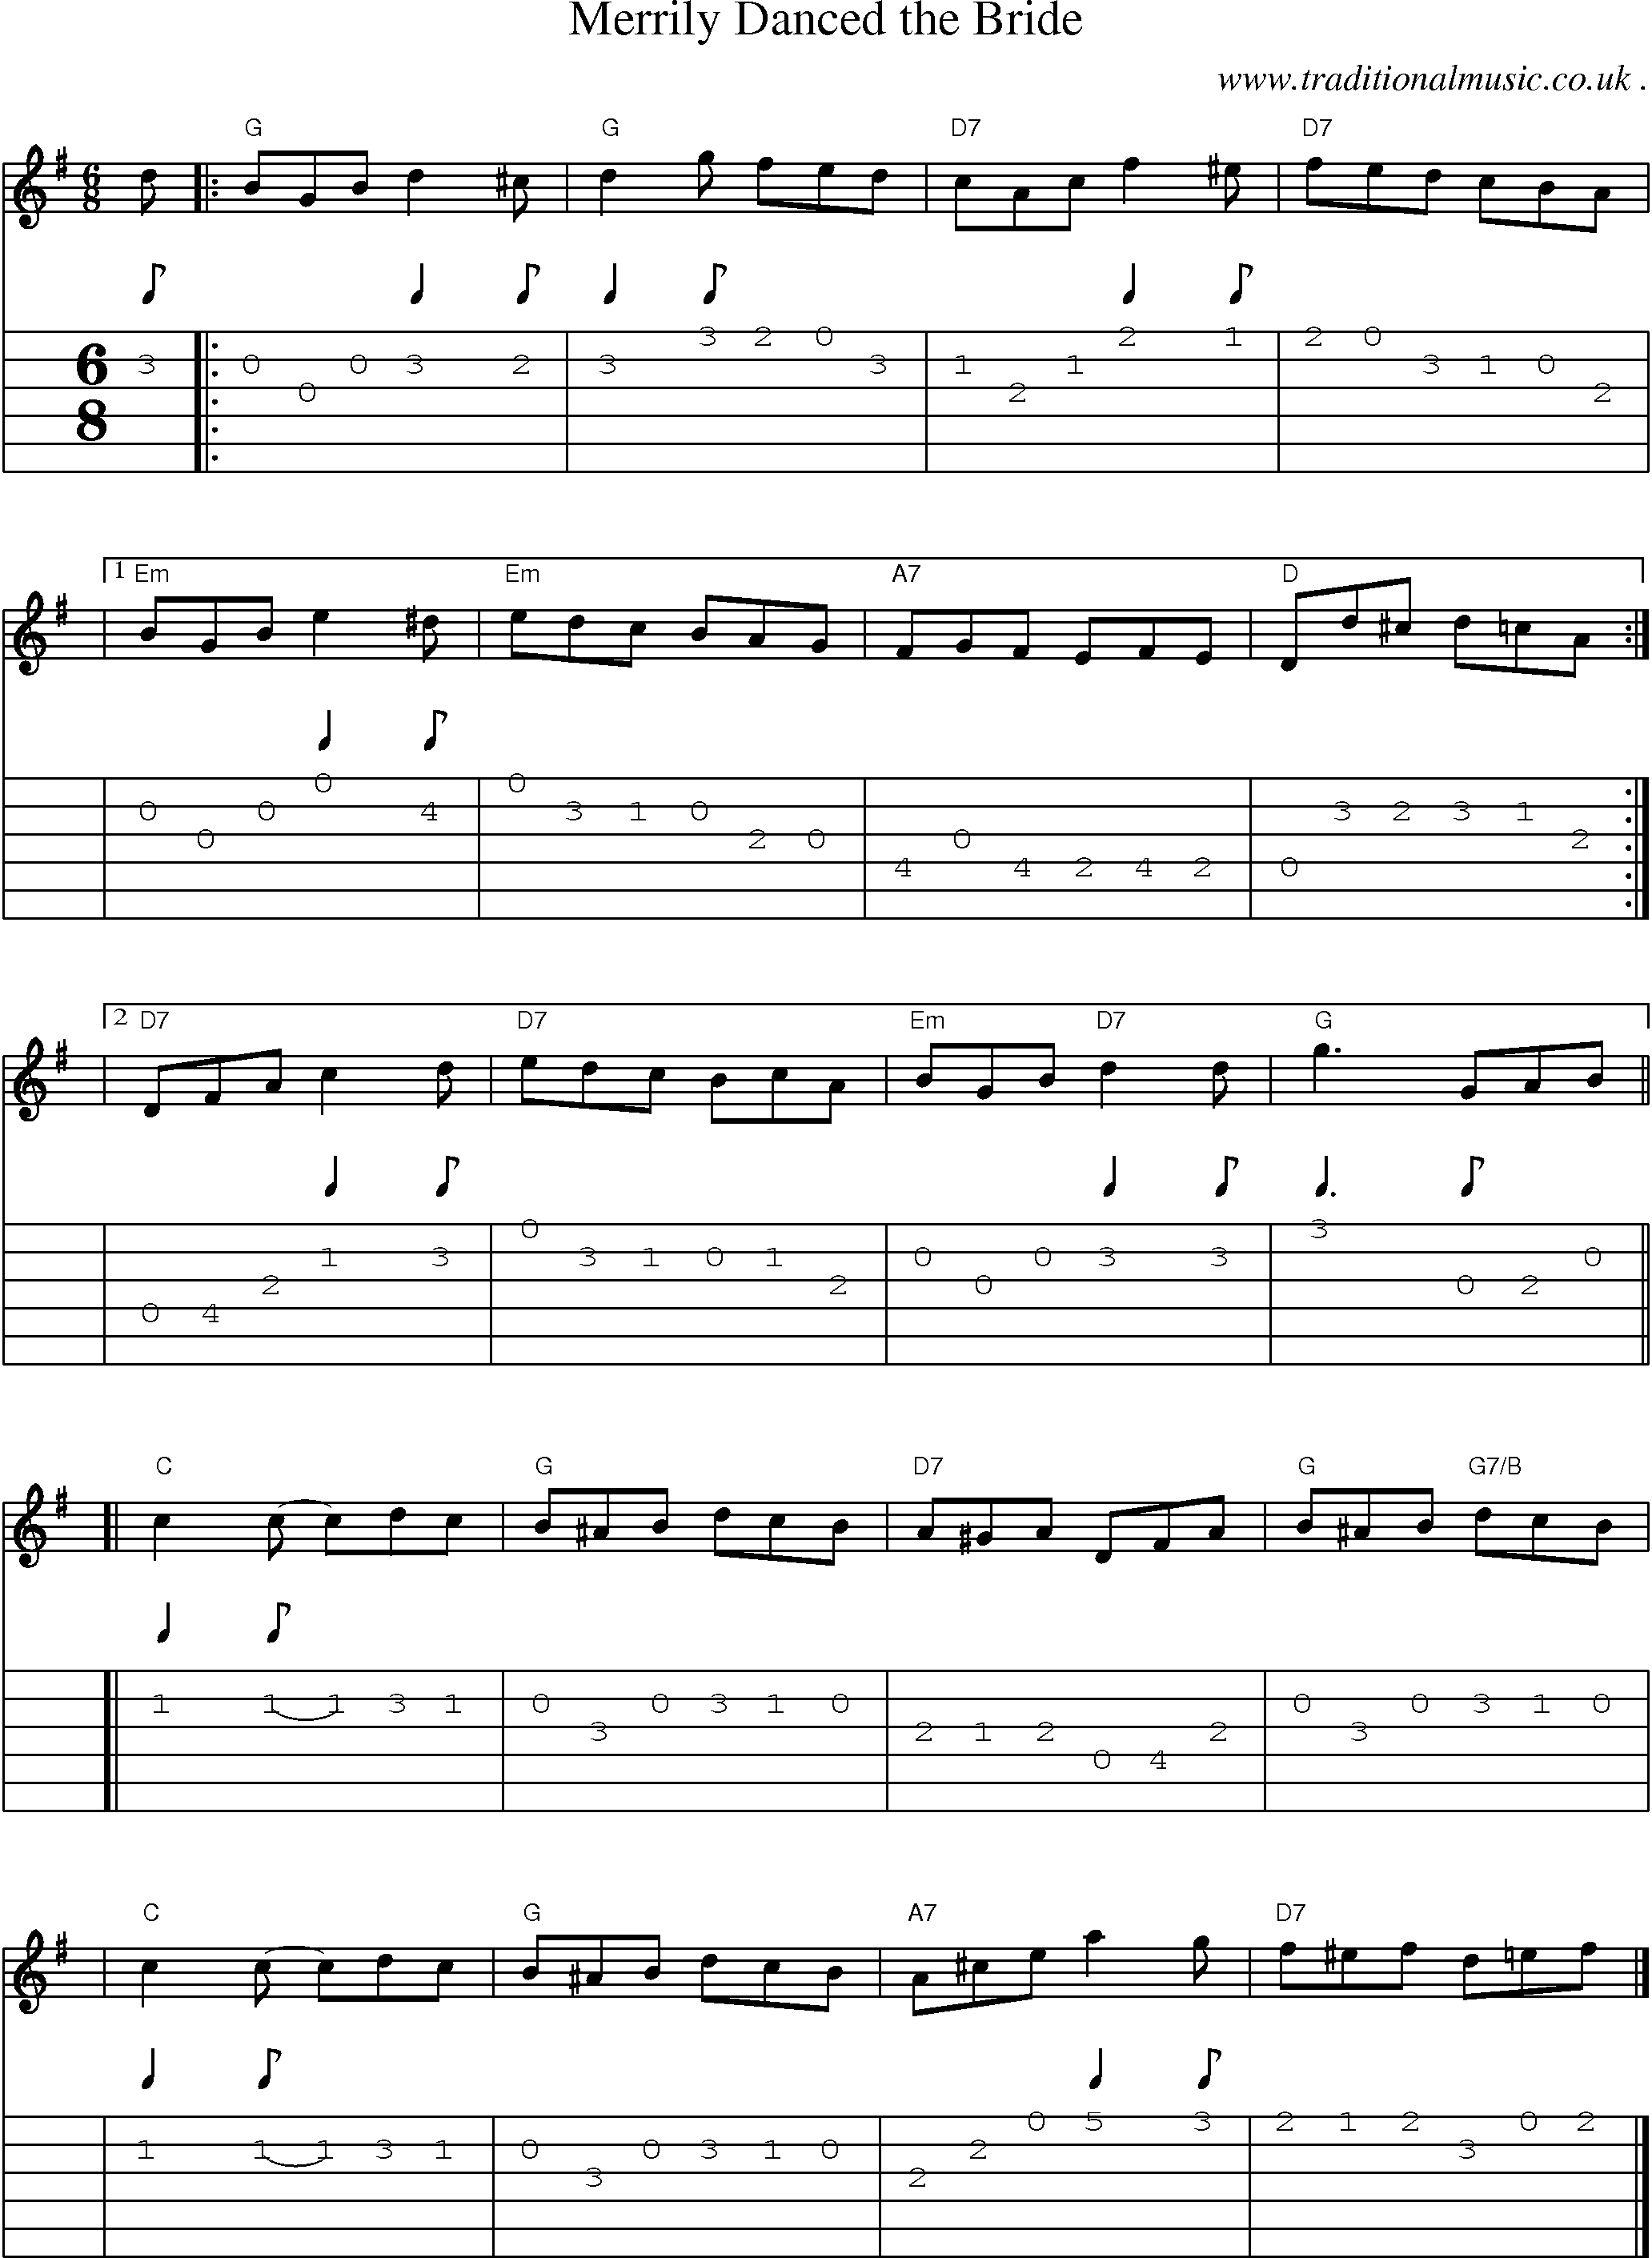 Sheet-music  score, Chords and Guitar Tabs for Merrily Danced The Bride